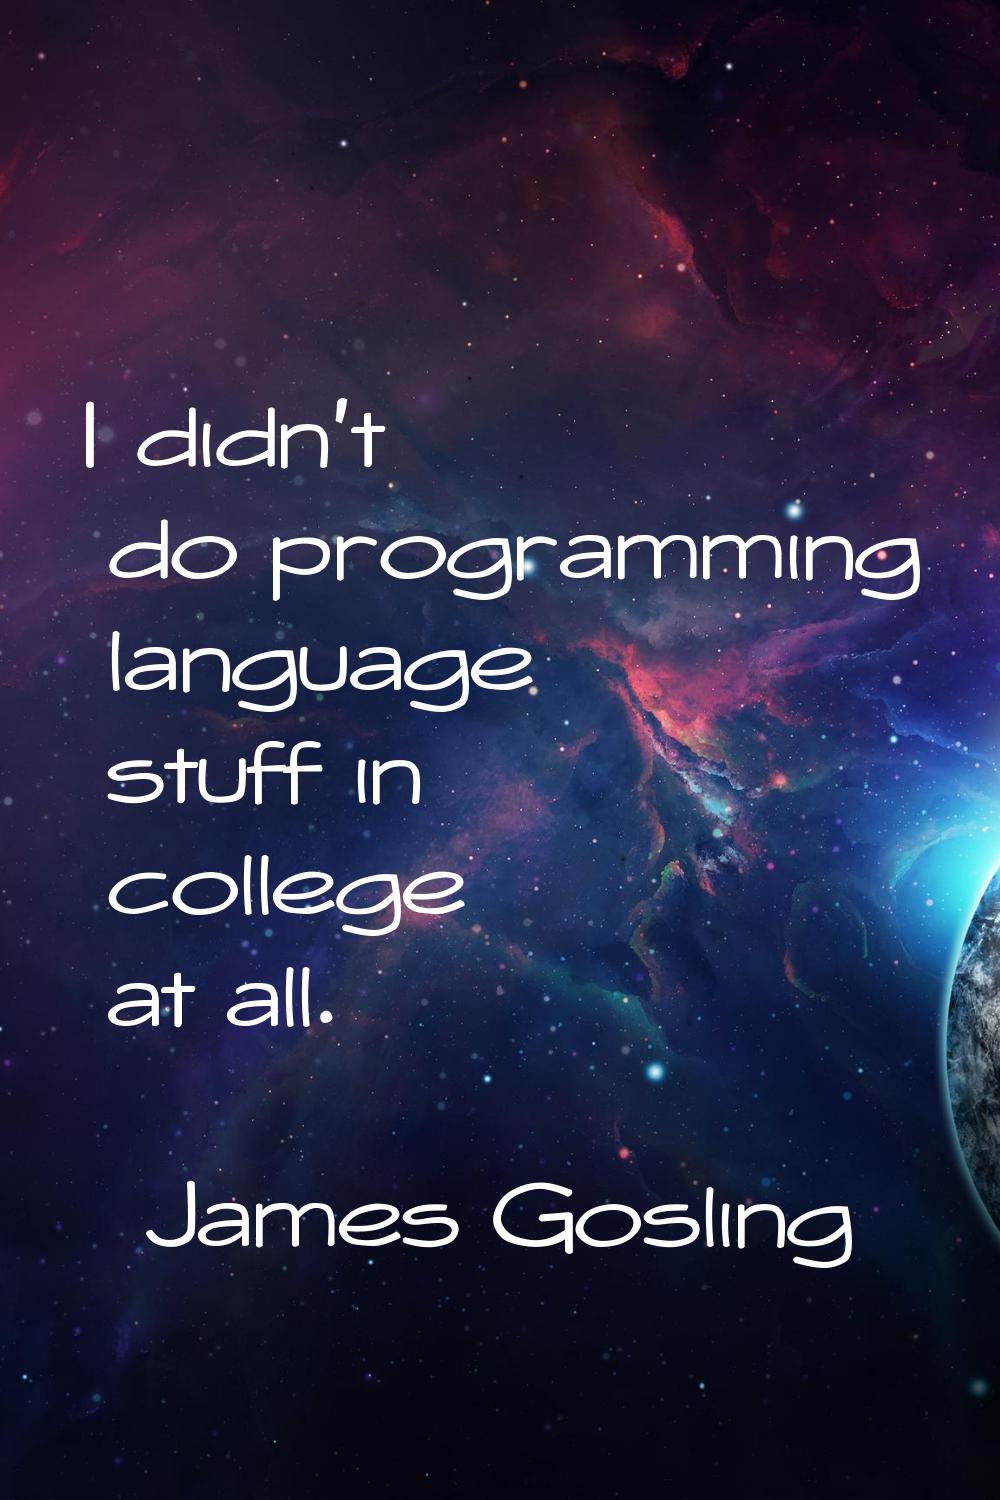 I didn't do programming language stuff in college at all.